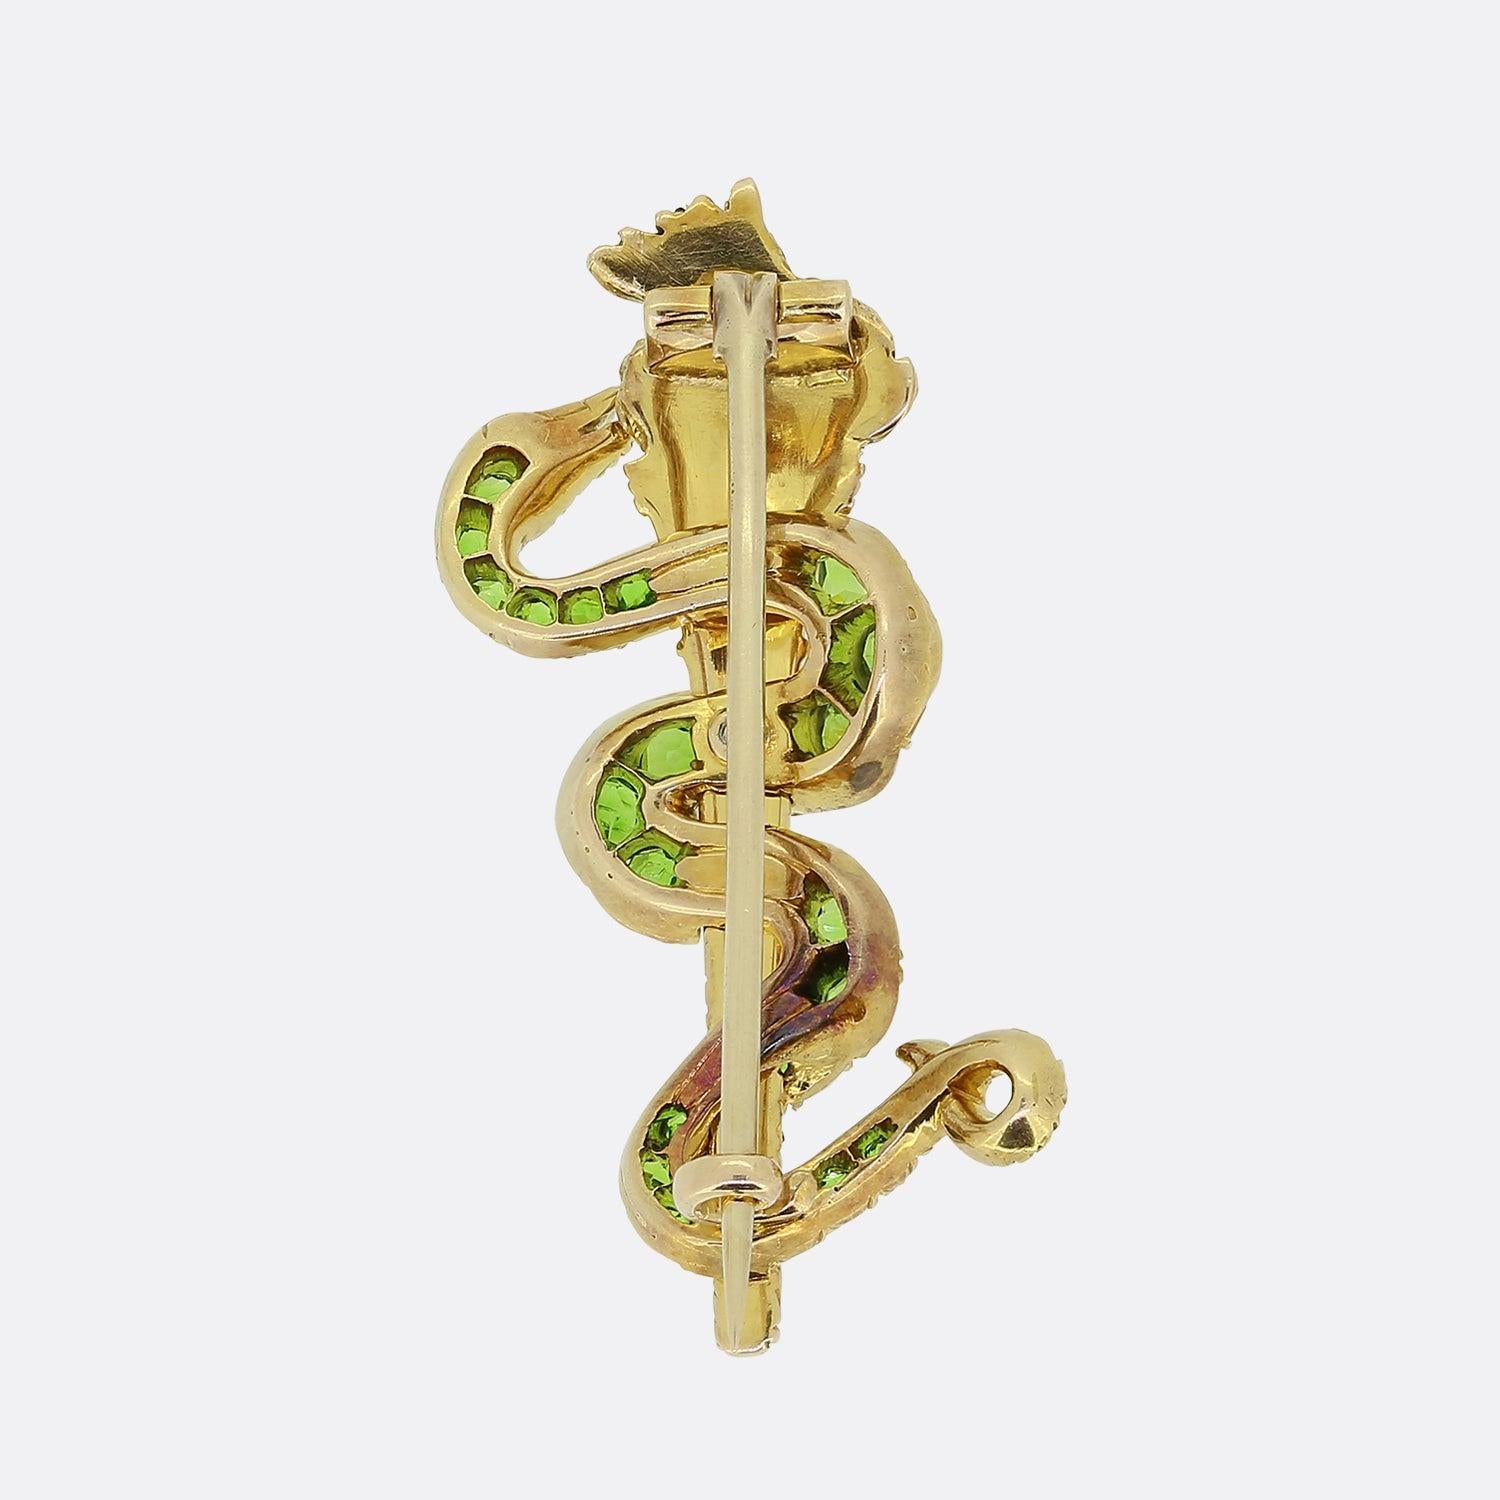 Here we have a truly remarkable brooch dating back to the Victorian era. At the centre of this 15ct yellow gold piece, a flaming torch has been crafted with a snake wrapping itself around the main shaft. Both motifs showcases expert craftsmanship